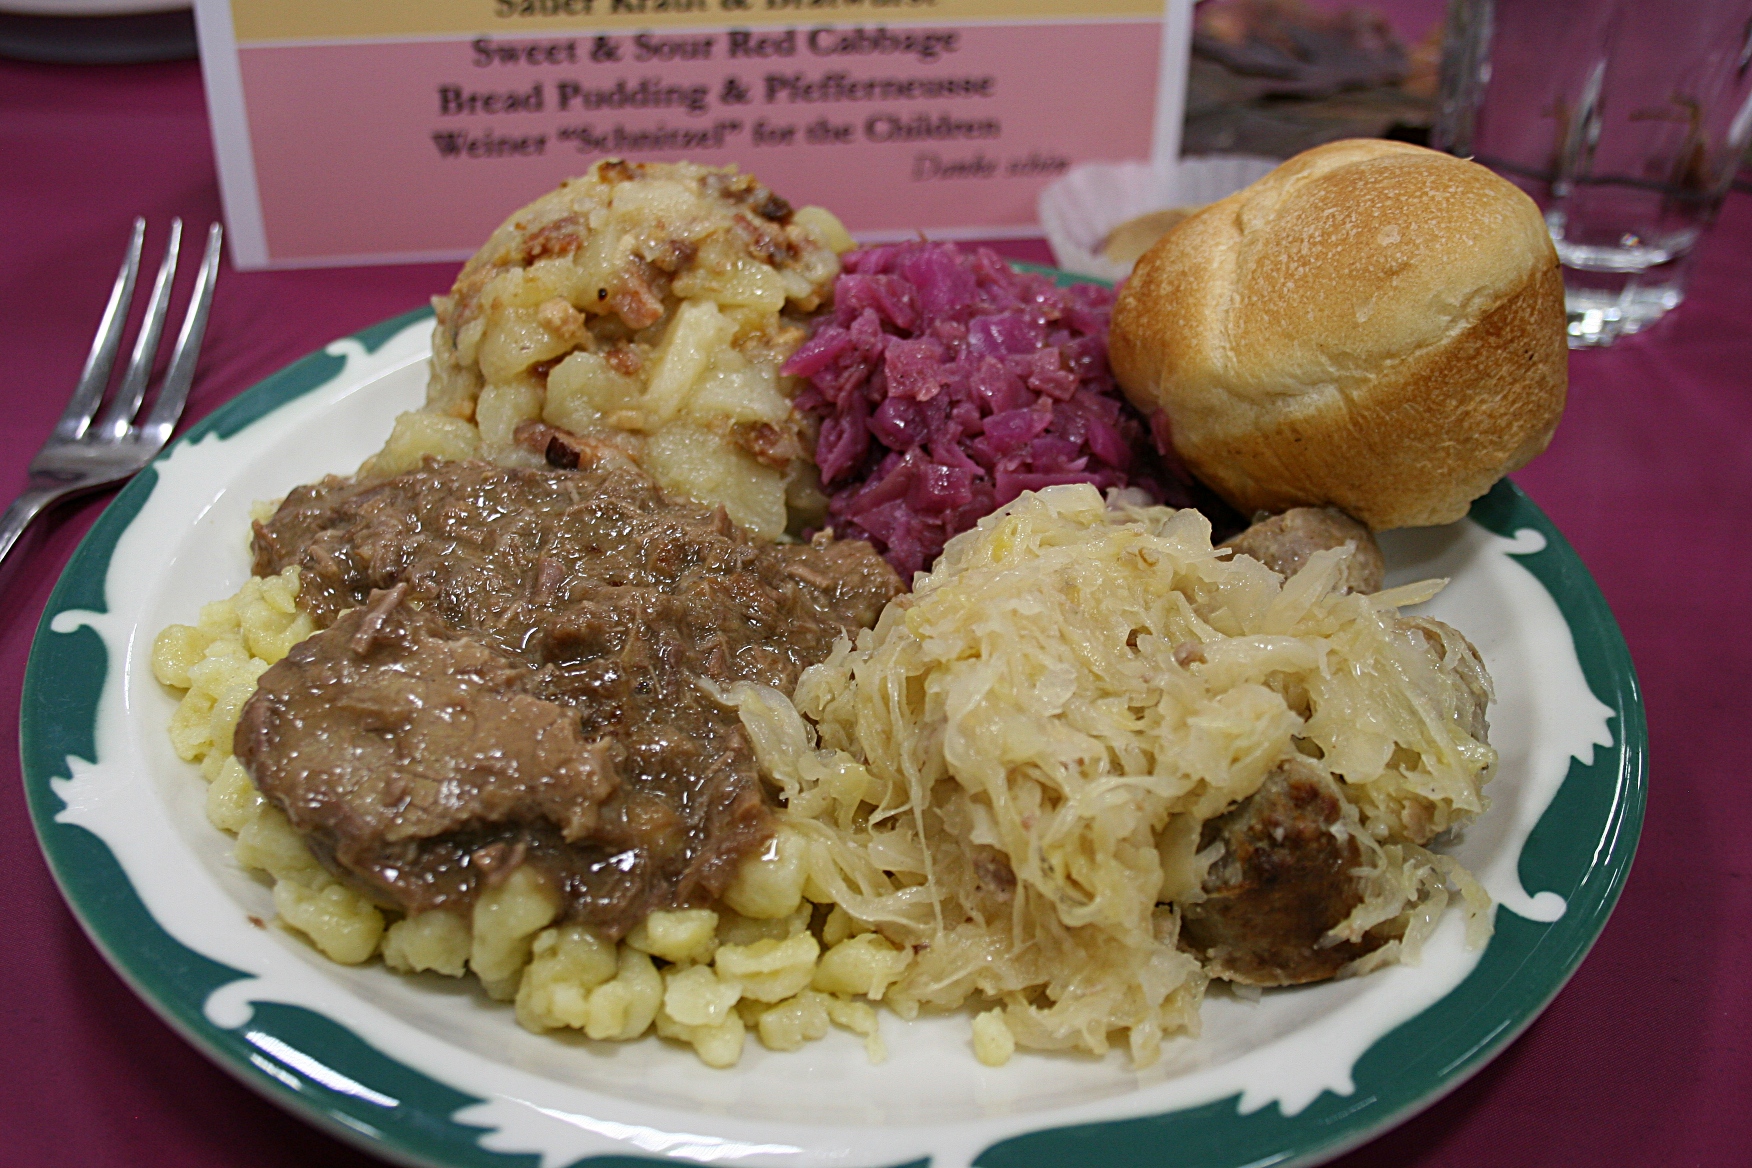 The 2011 CVLHS German meal: sauerbraten and spaetzle on the left 